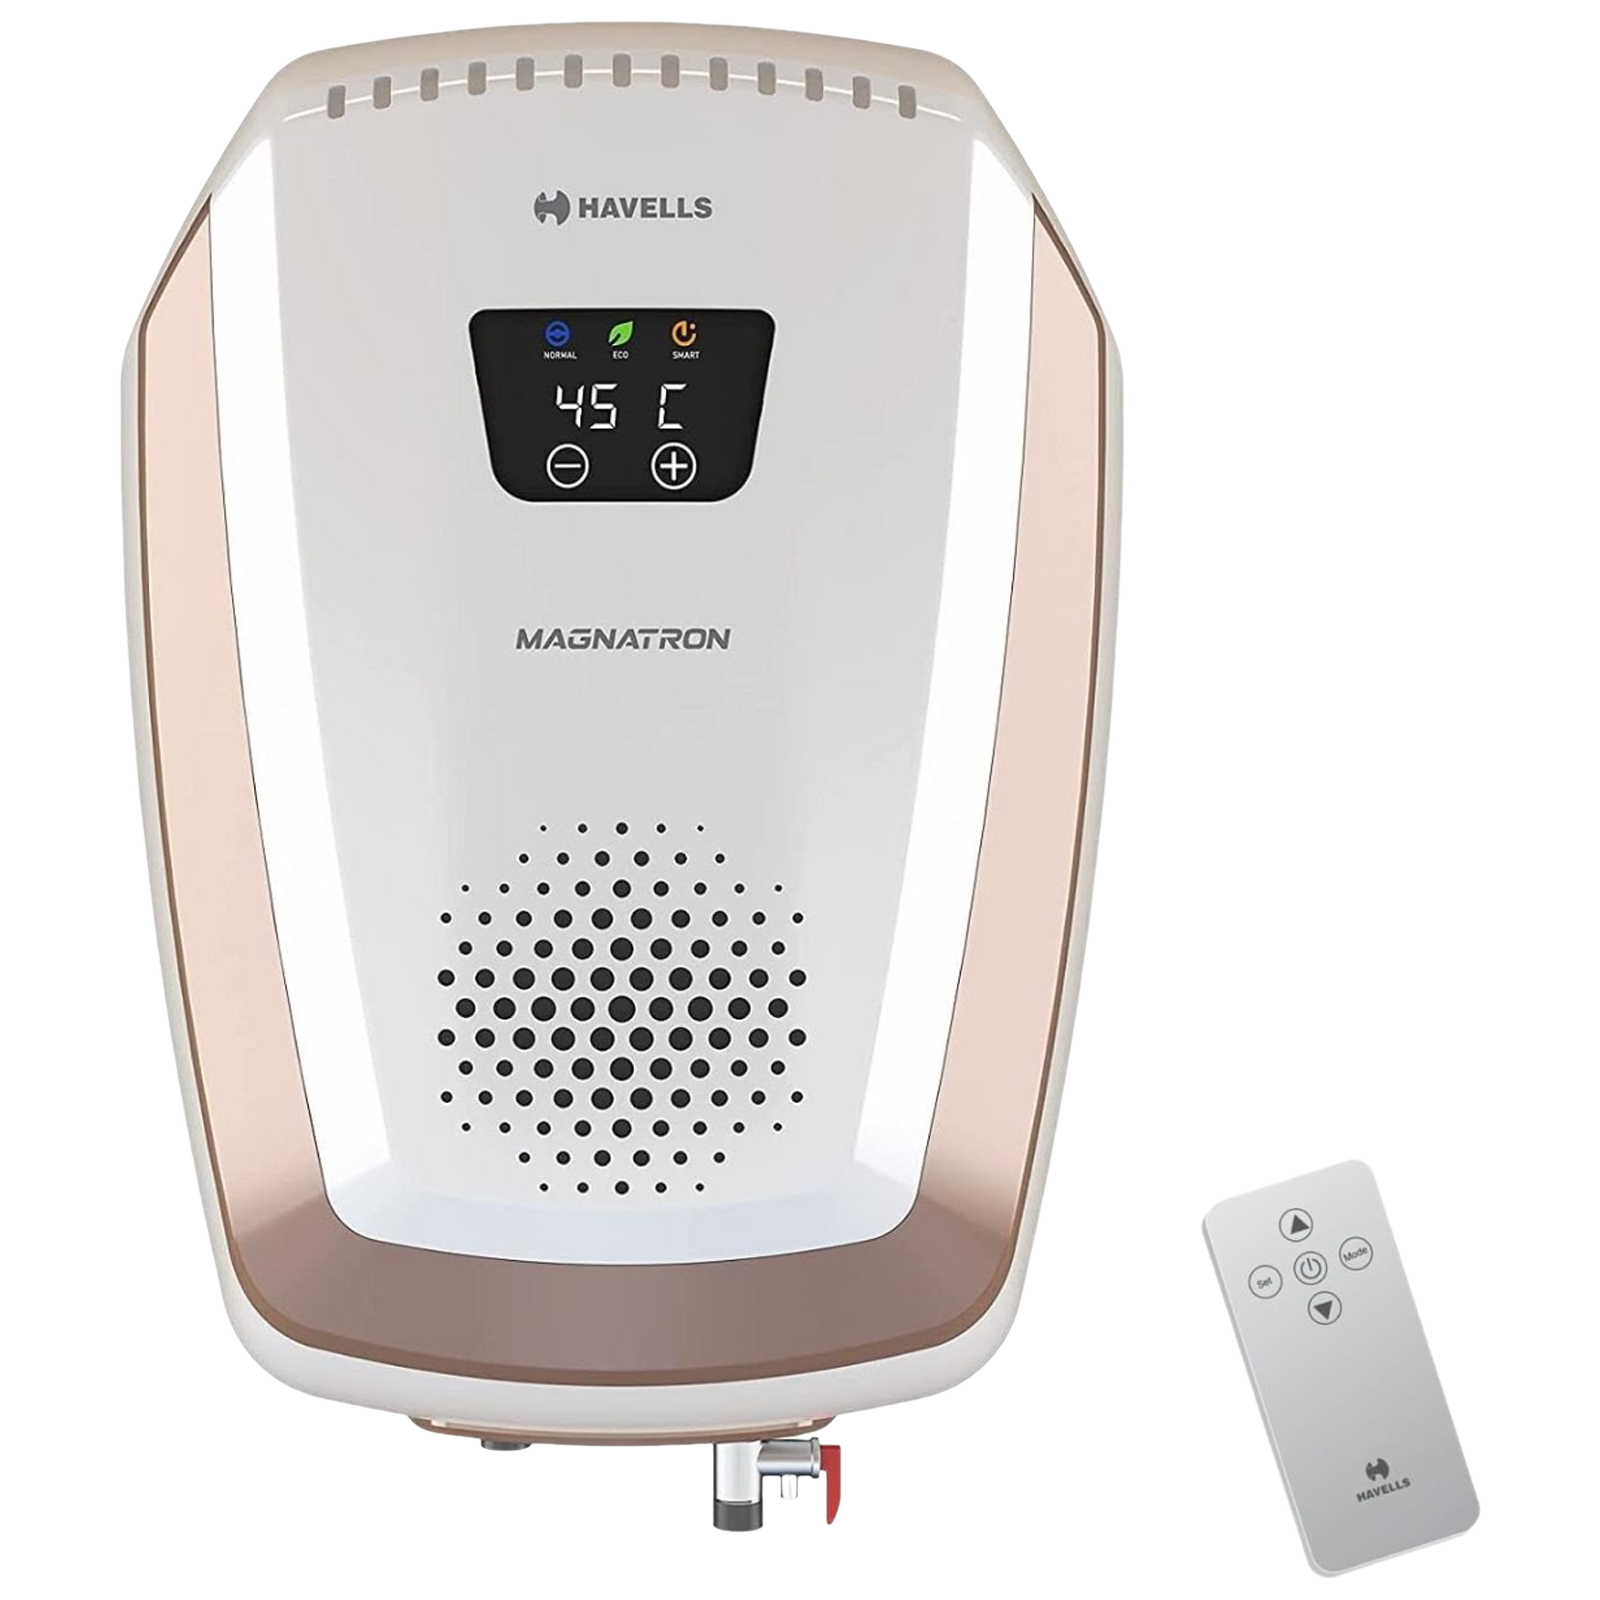 HAVELLS Magnatron 15 Litre 4 Star Vertical Storage Geyser with Overheat Protection (White Champagne Gold)